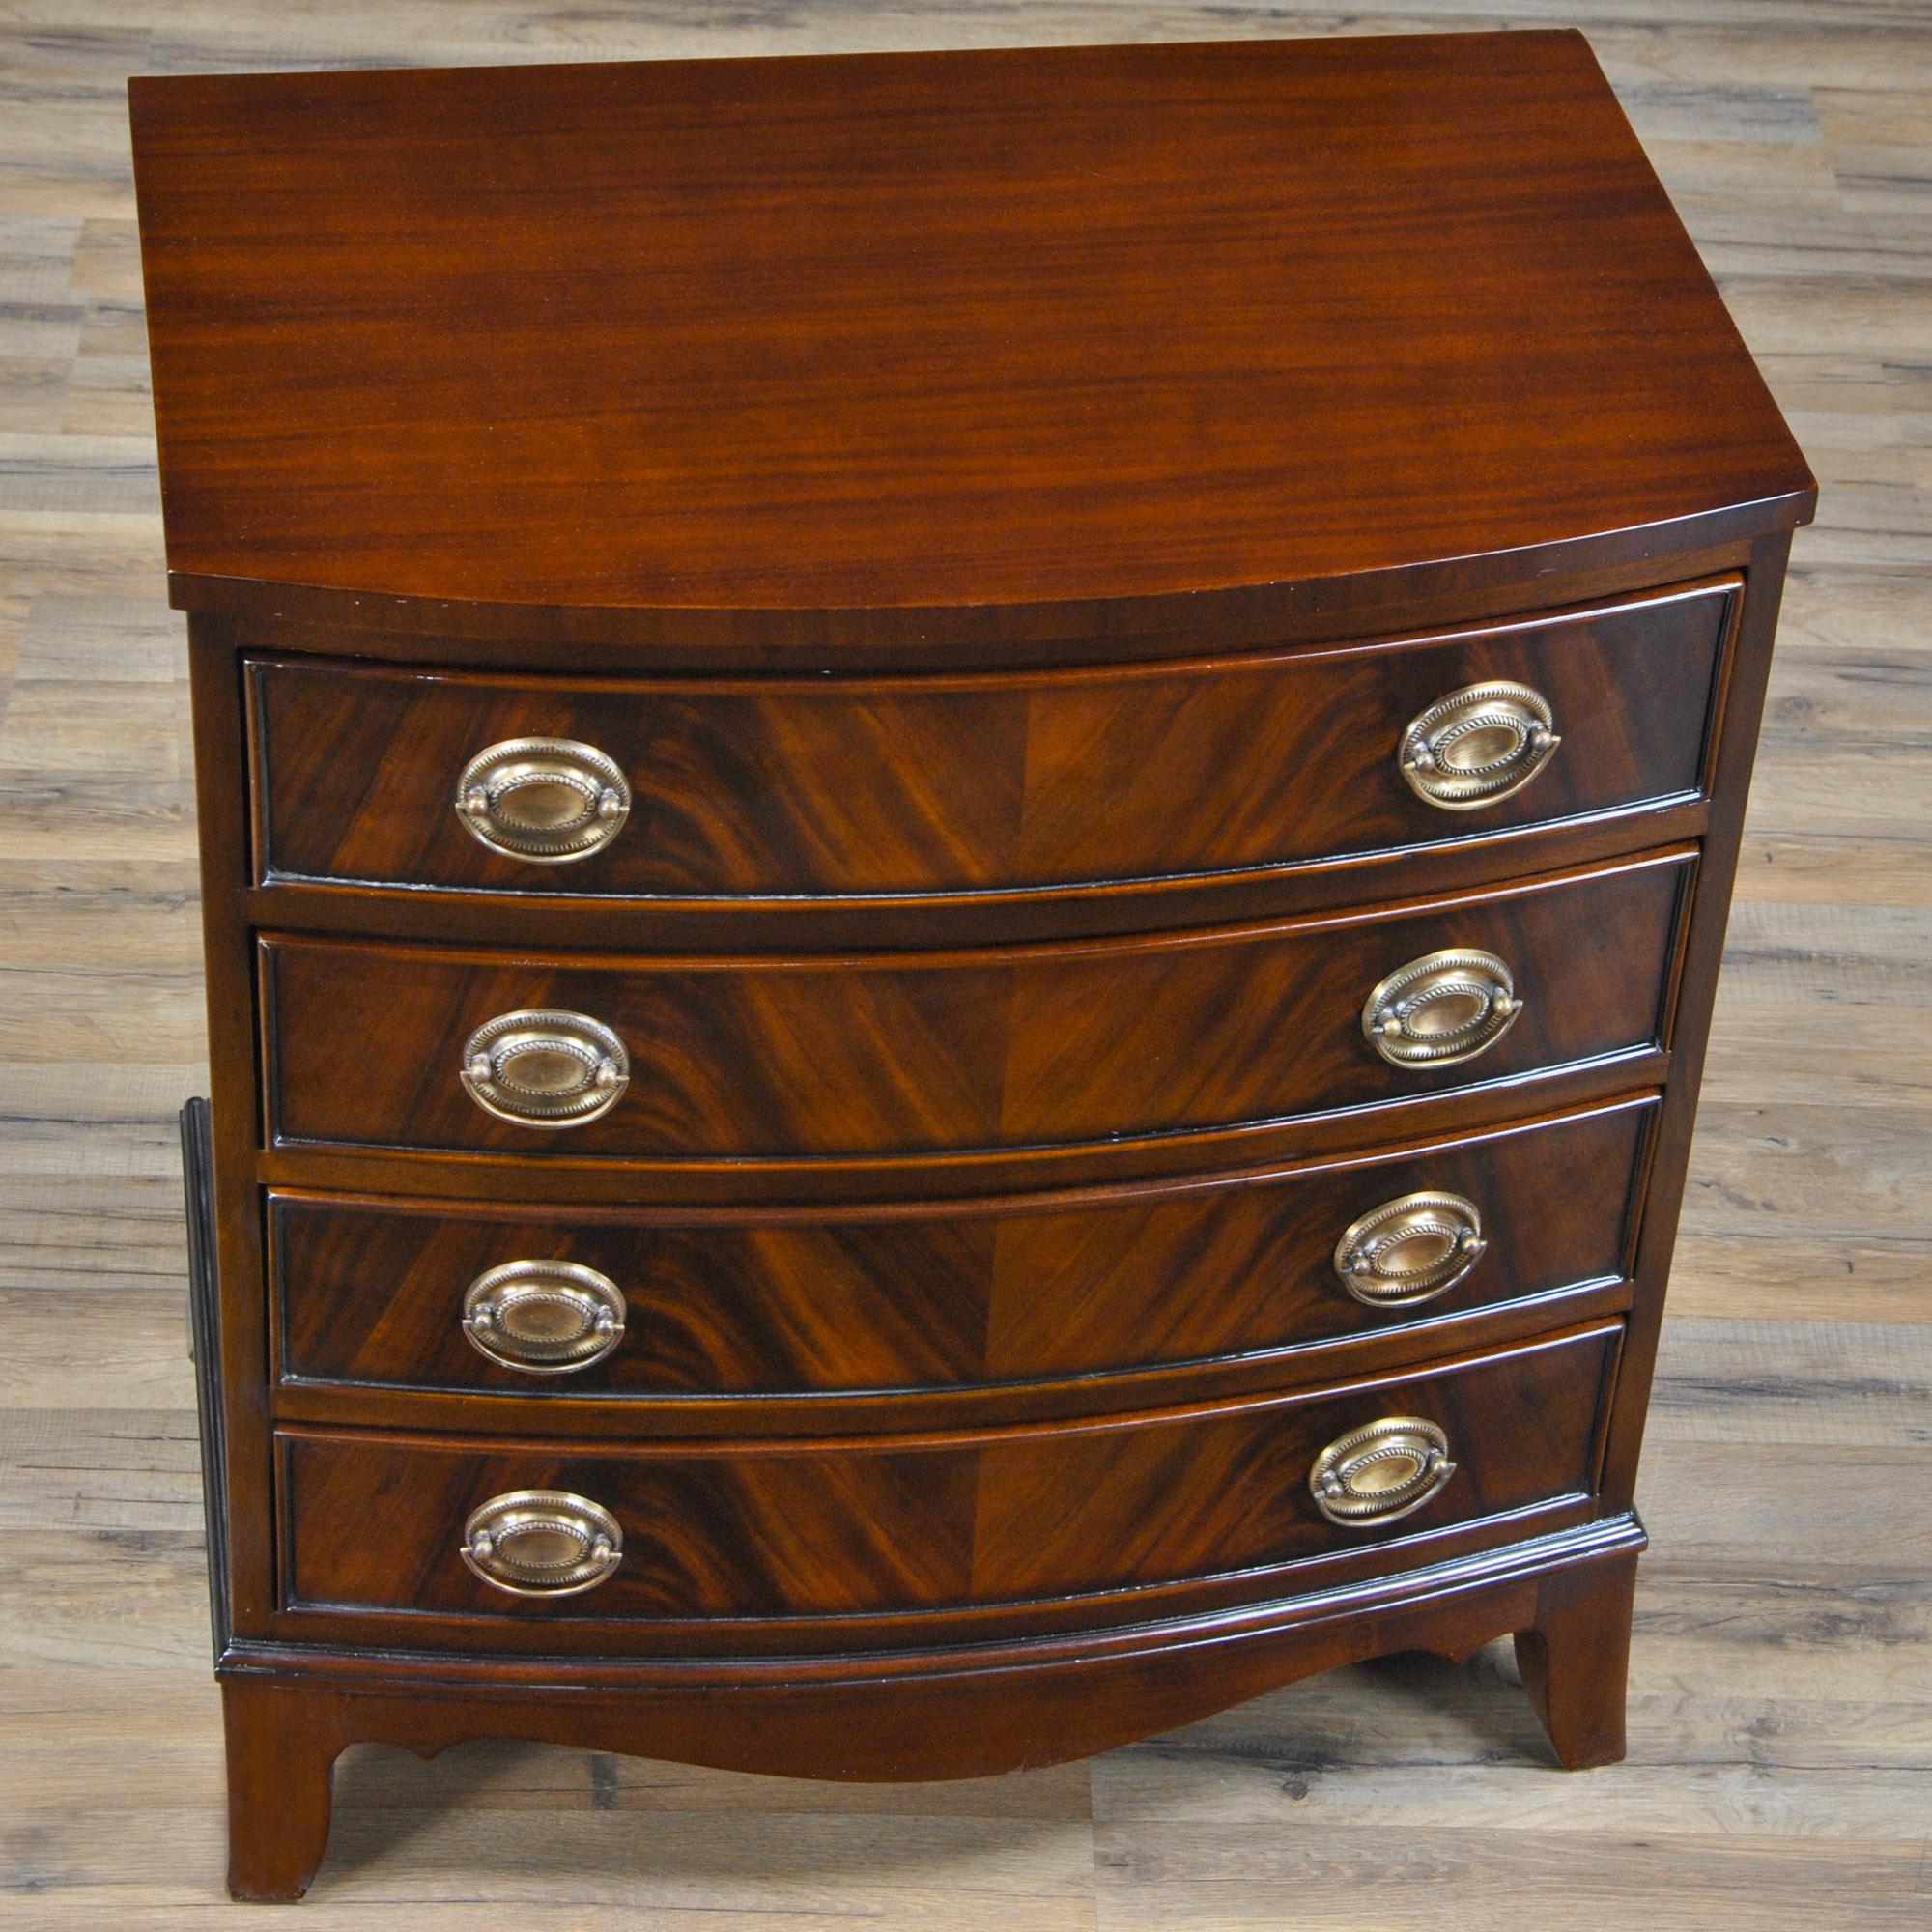 From the tastefully tapered legs to the finely shaped drawer fronts this Small Mahogany Chest with Drawers expresses great taste in design. Graduated drawers, great mahogany veneers and mahogany solids work together to make a wonderful addition to